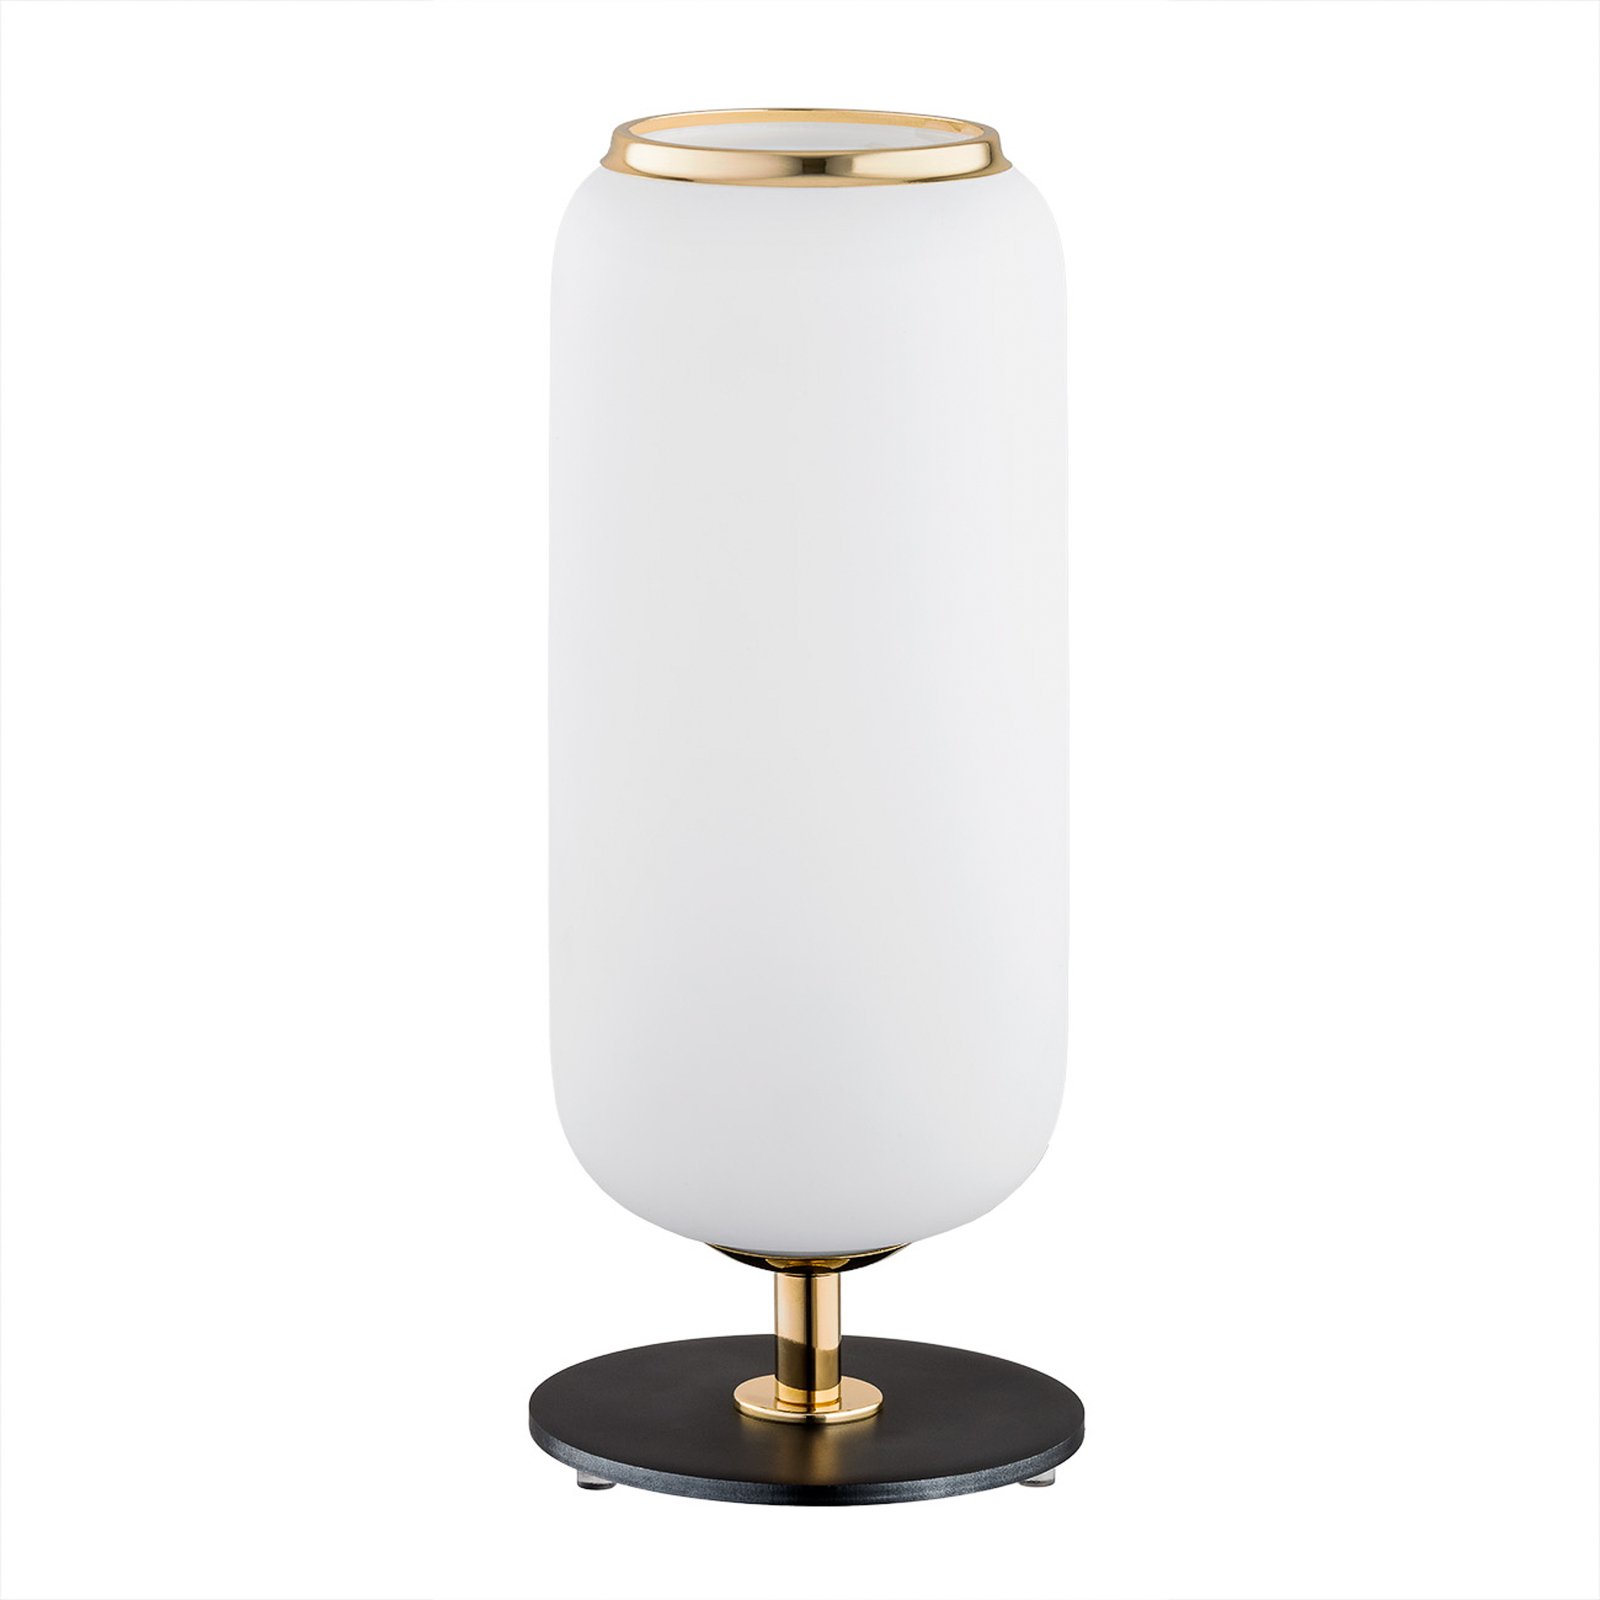 Valiano table lamp with white glass shade